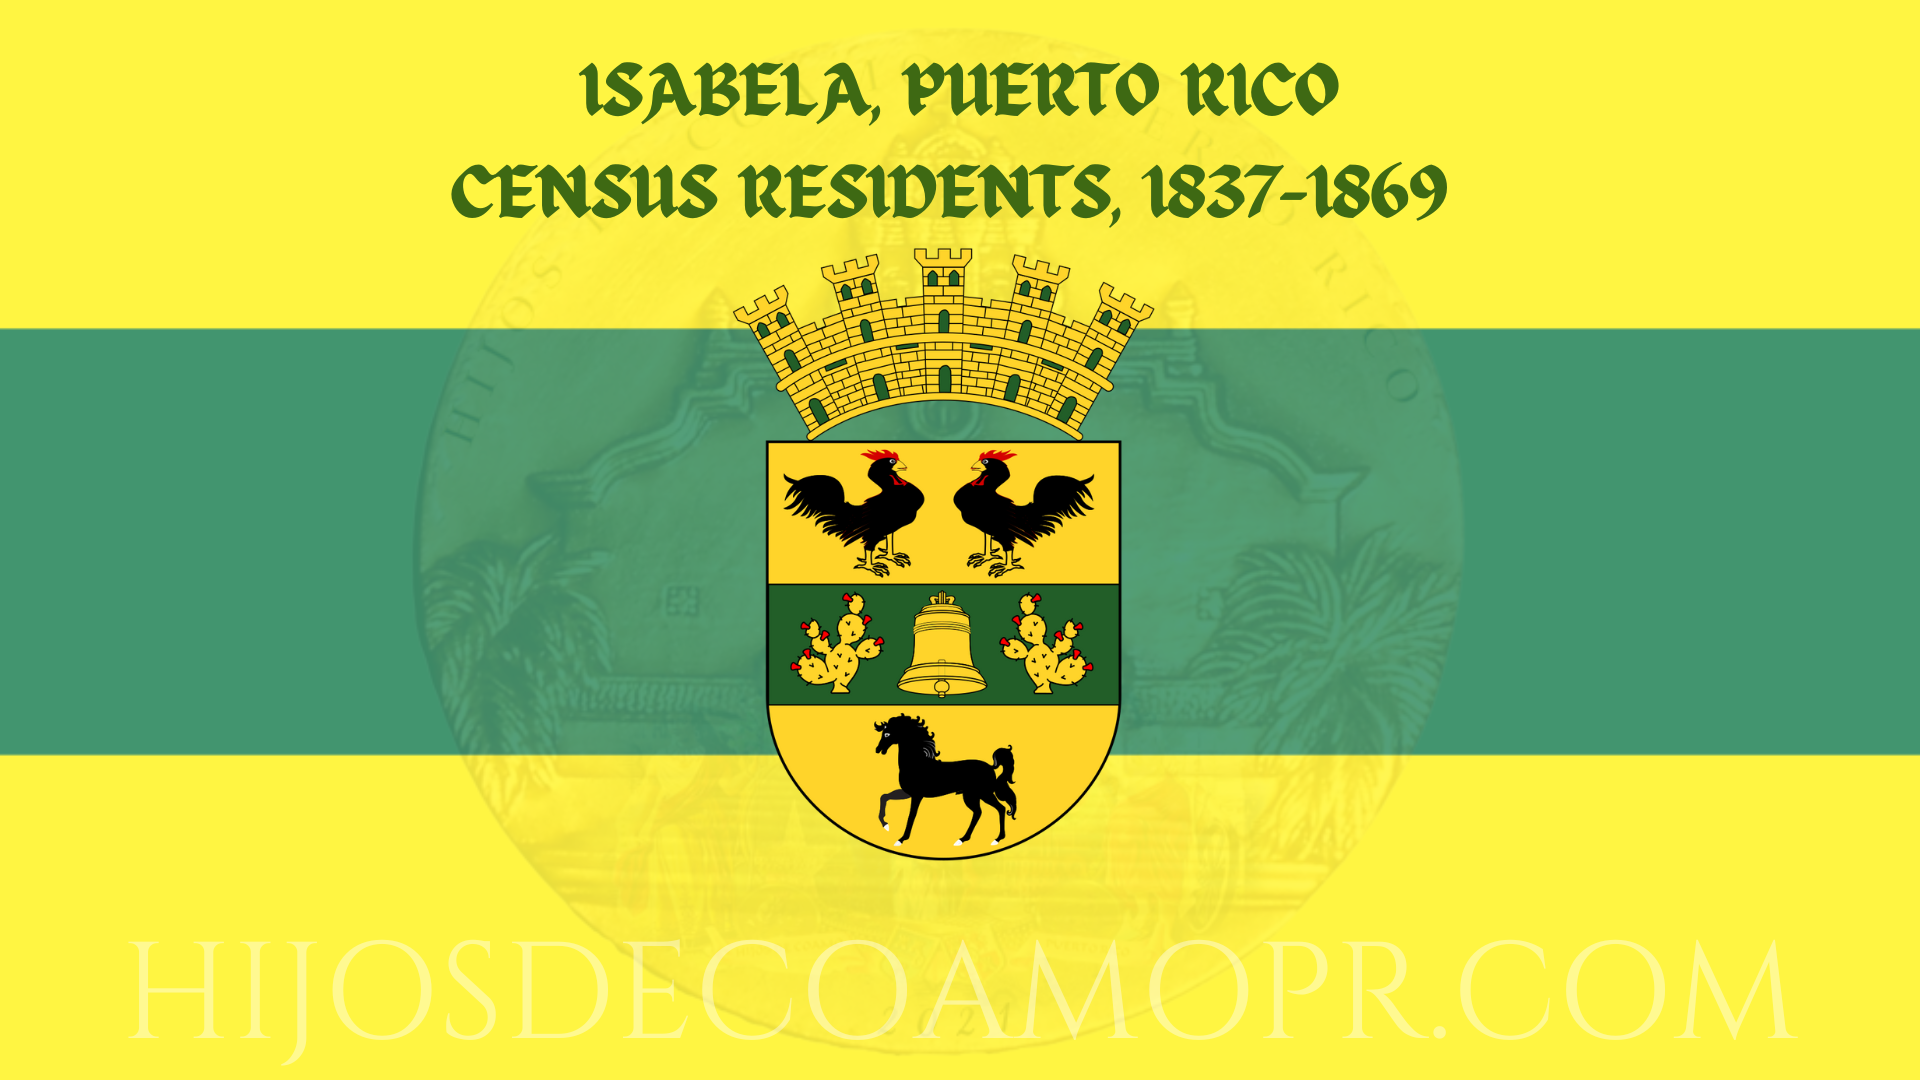 Census of Residents, Isabela, Puerto Rico, 19th Century. Includes a wealth of information about its residents, such as Marital status, age, etc.